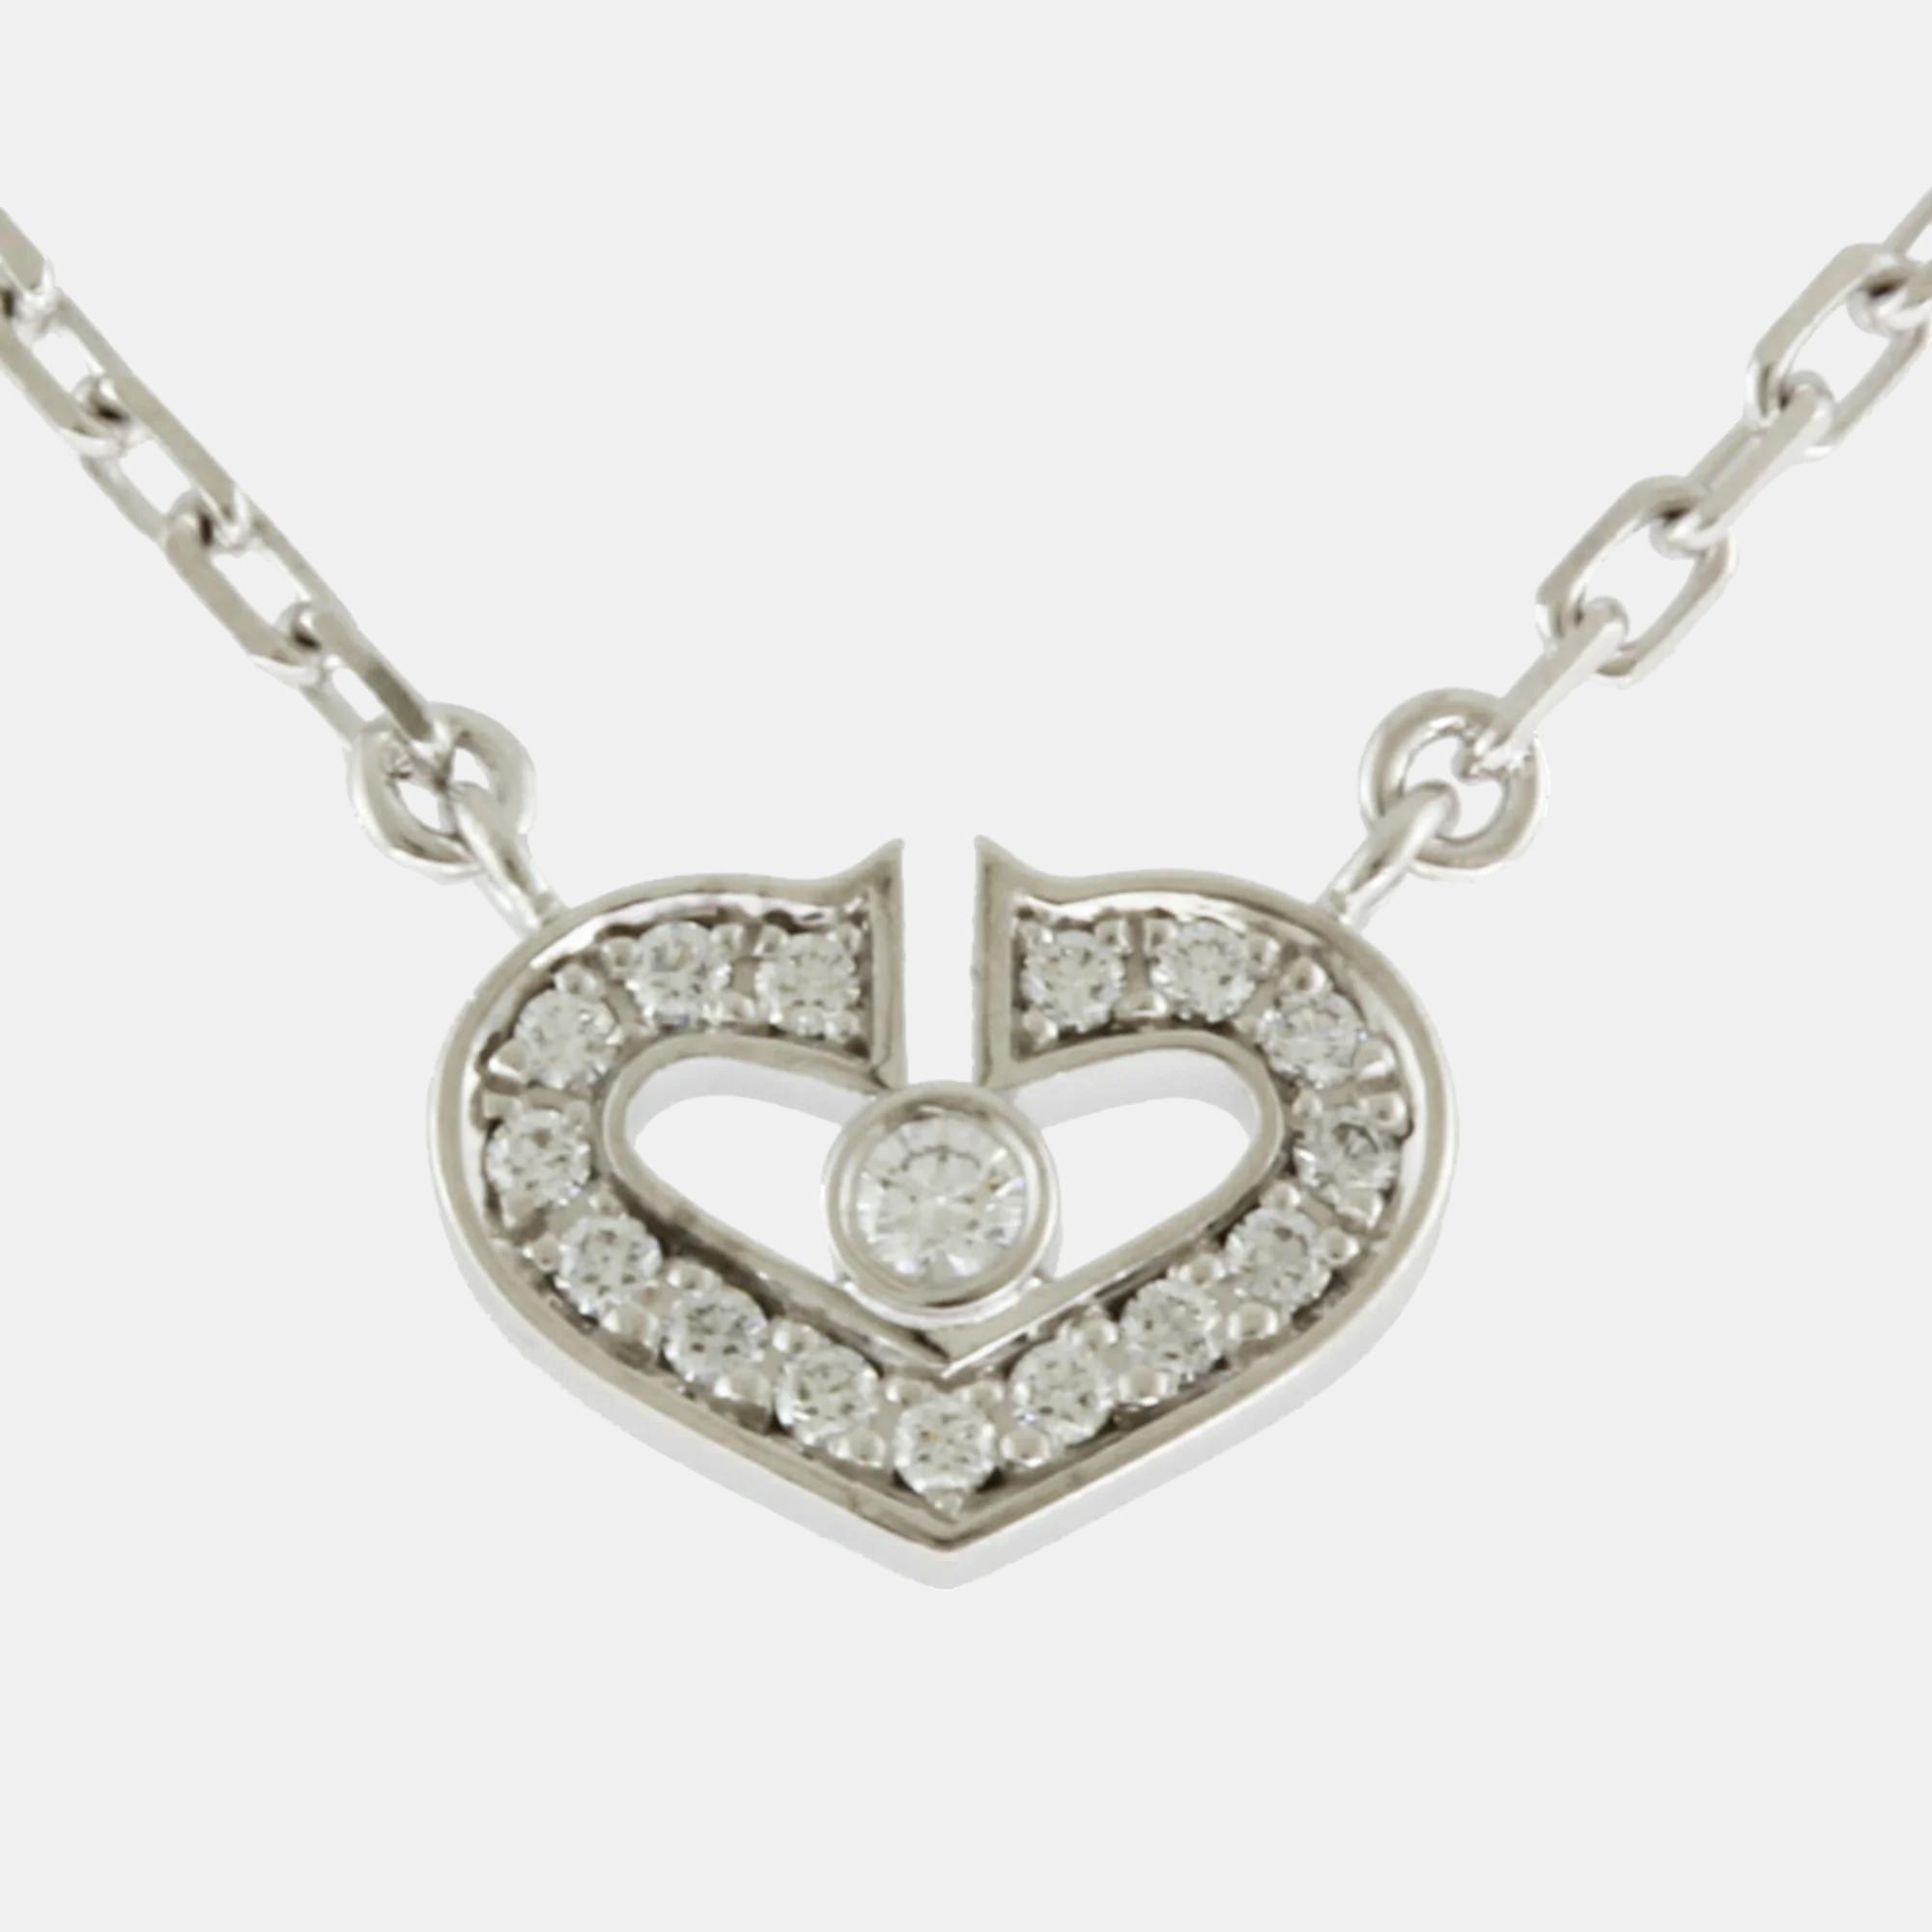 Cartier 18k white gold and diamond heart c pendant necklace